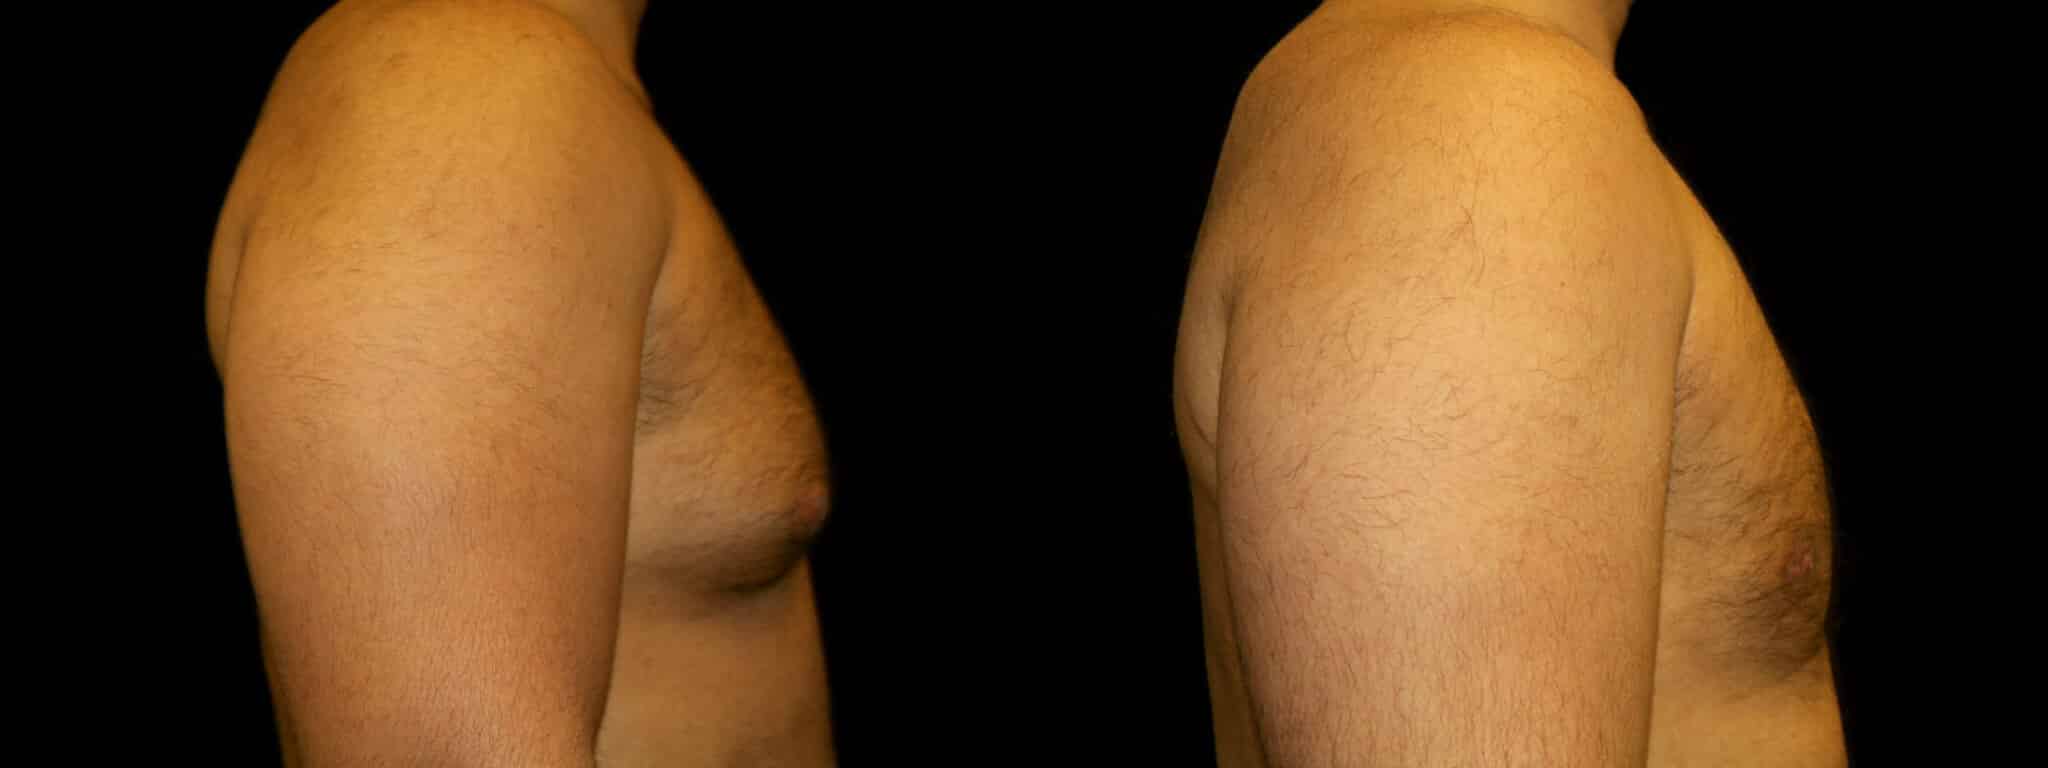 Gynecomastia Patient 11 Before & After Details